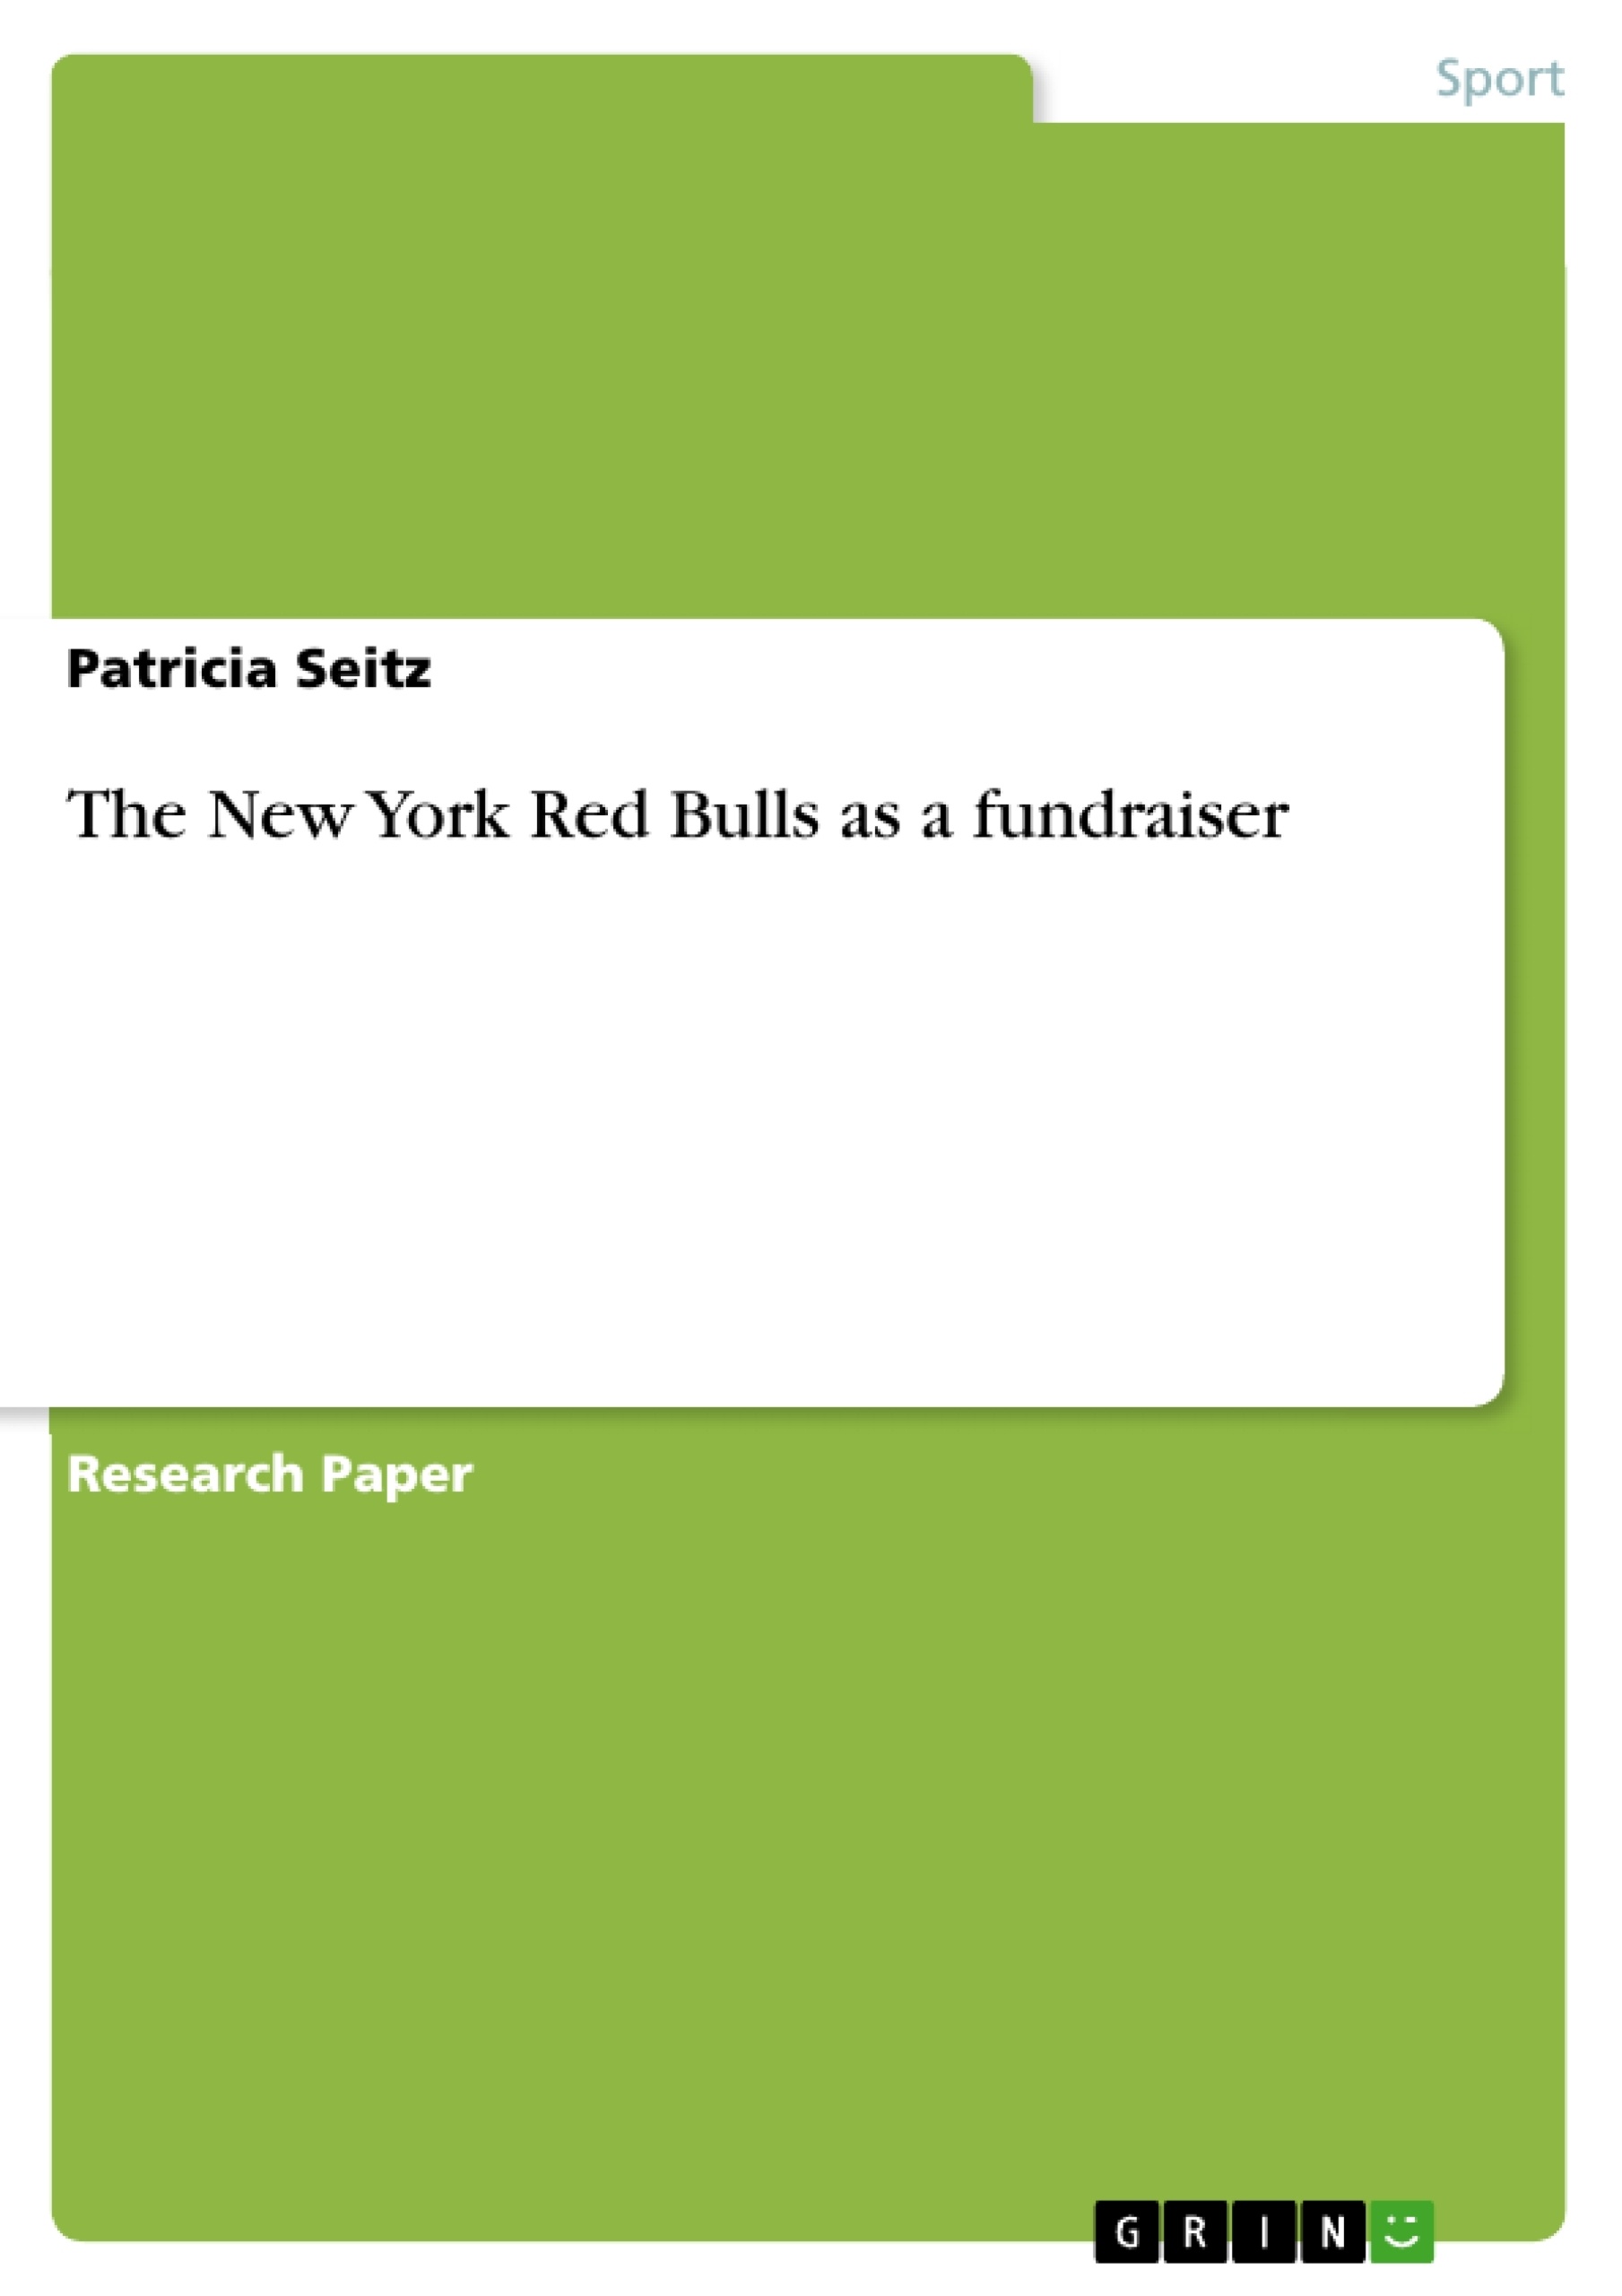 Title: The New York Red Bulls as a fundraiser